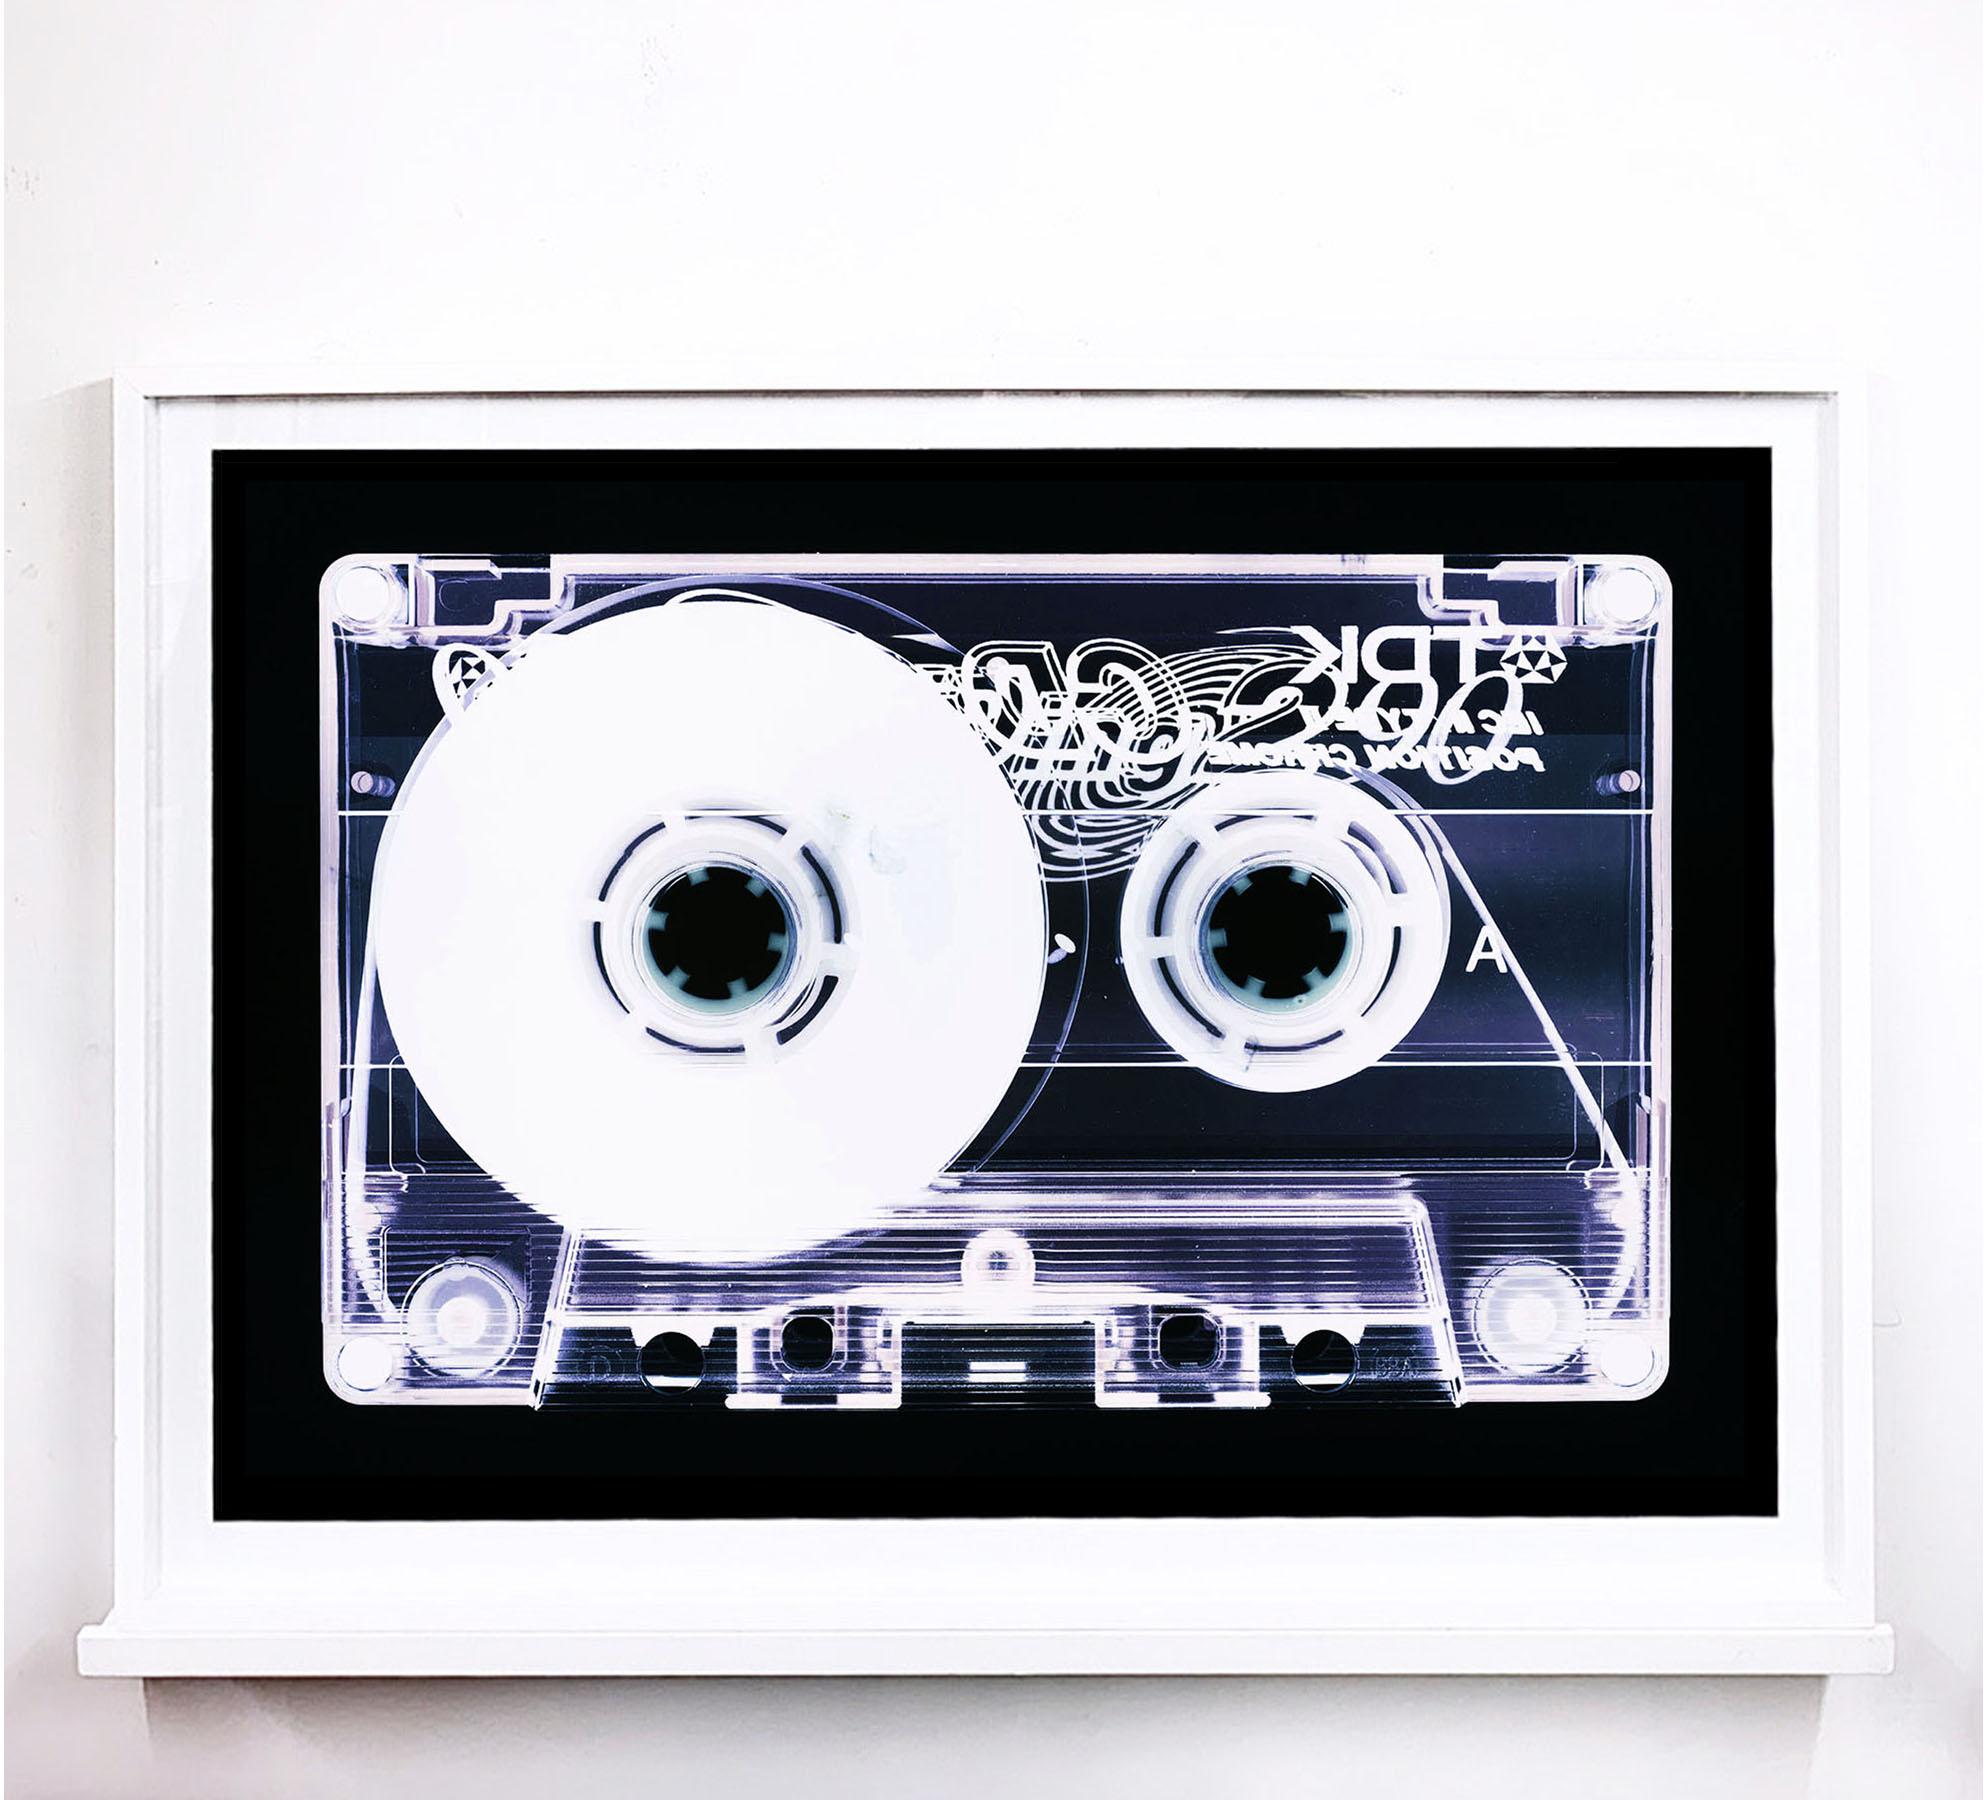 Tape Collection - Blank Tape Side A - Conceptual Color Music Art - Photograph by Heidler & Heeps